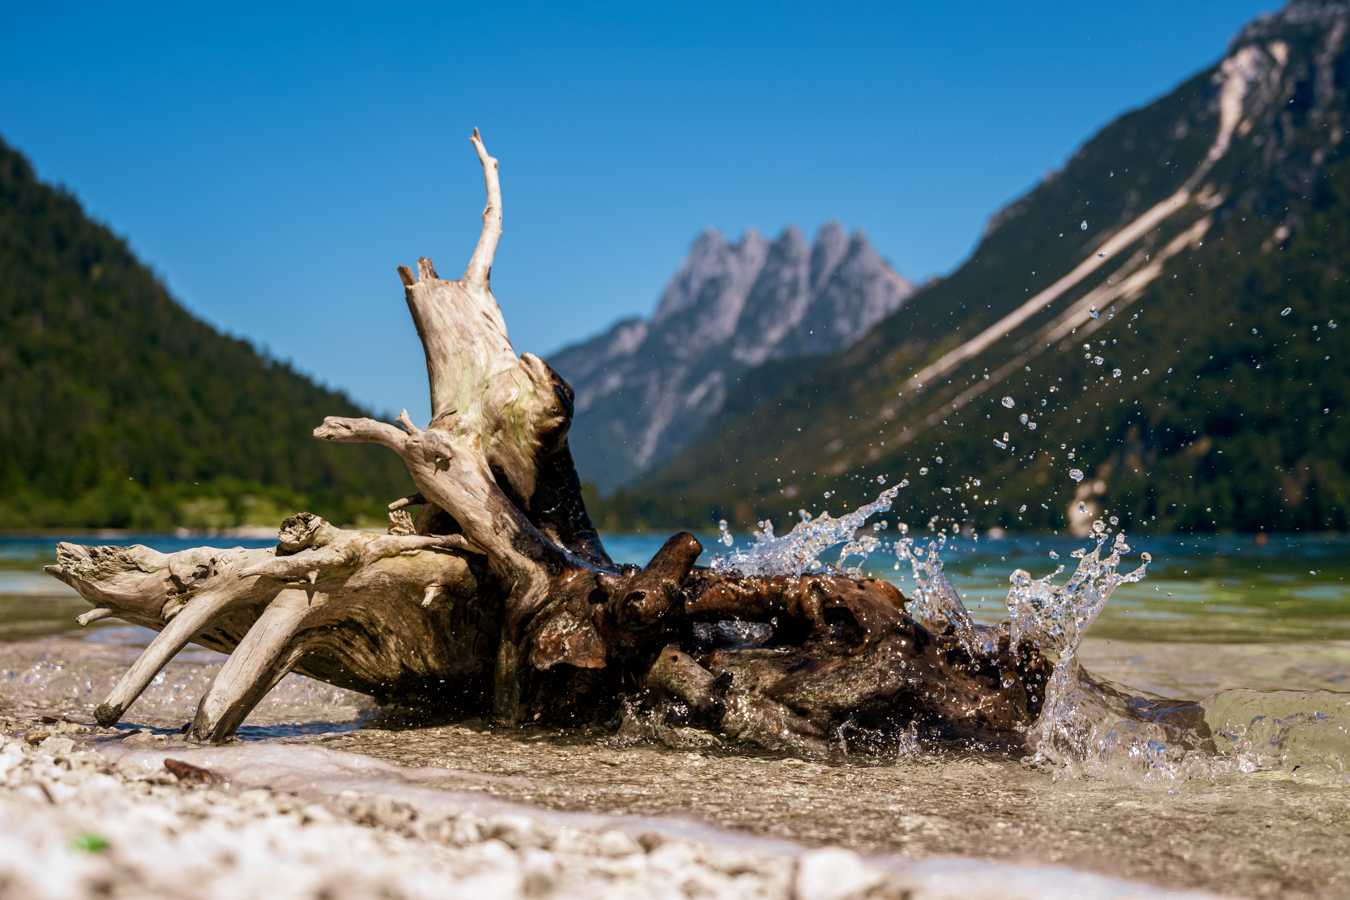 driftwood by the lake in nature